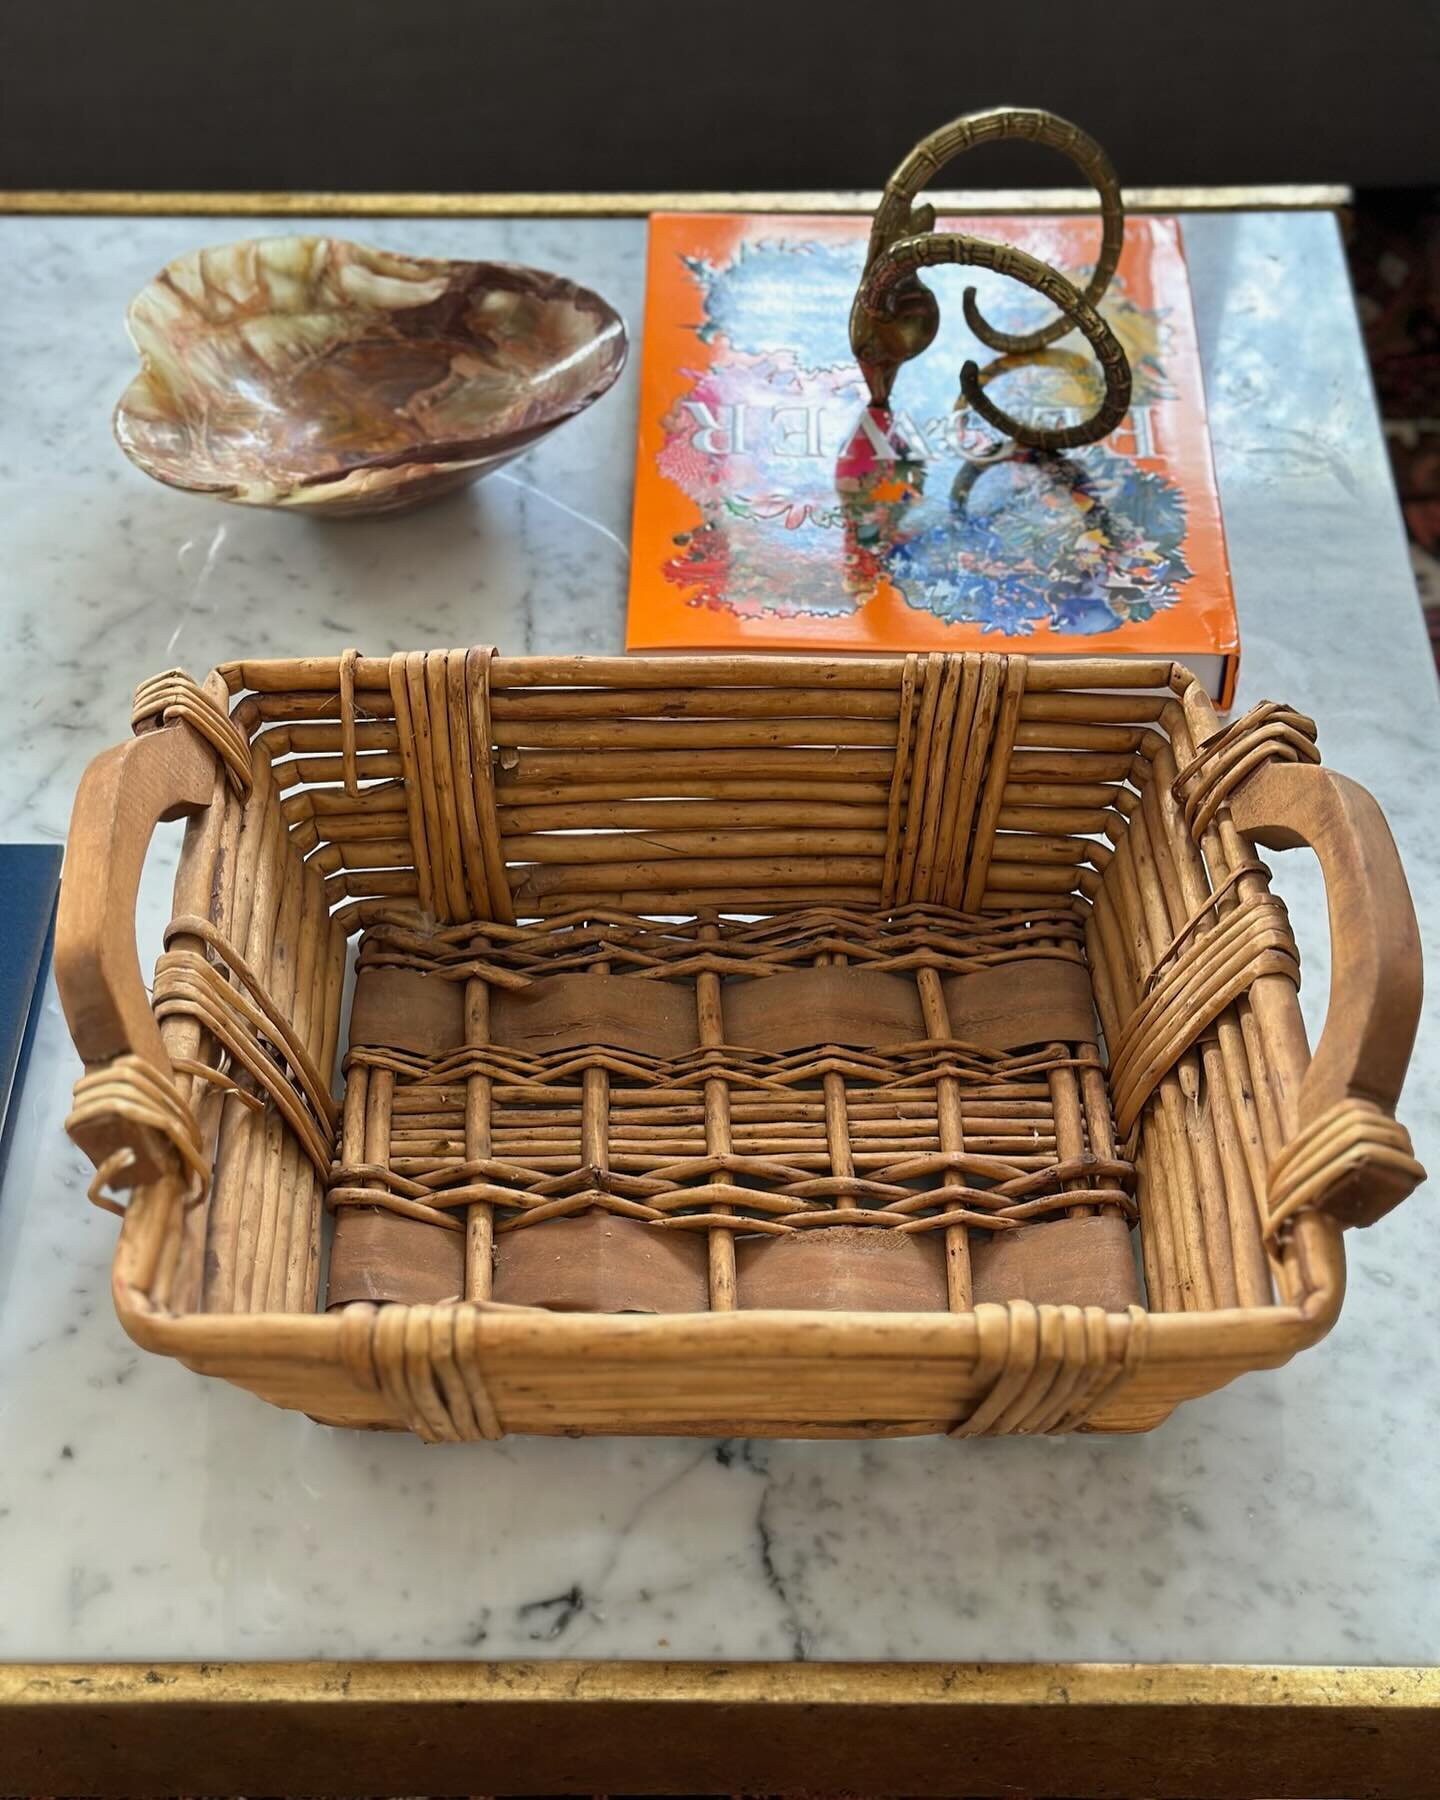 This vintage woven basket with wooden handles is the perfect table topper! Link in stories to purchase.